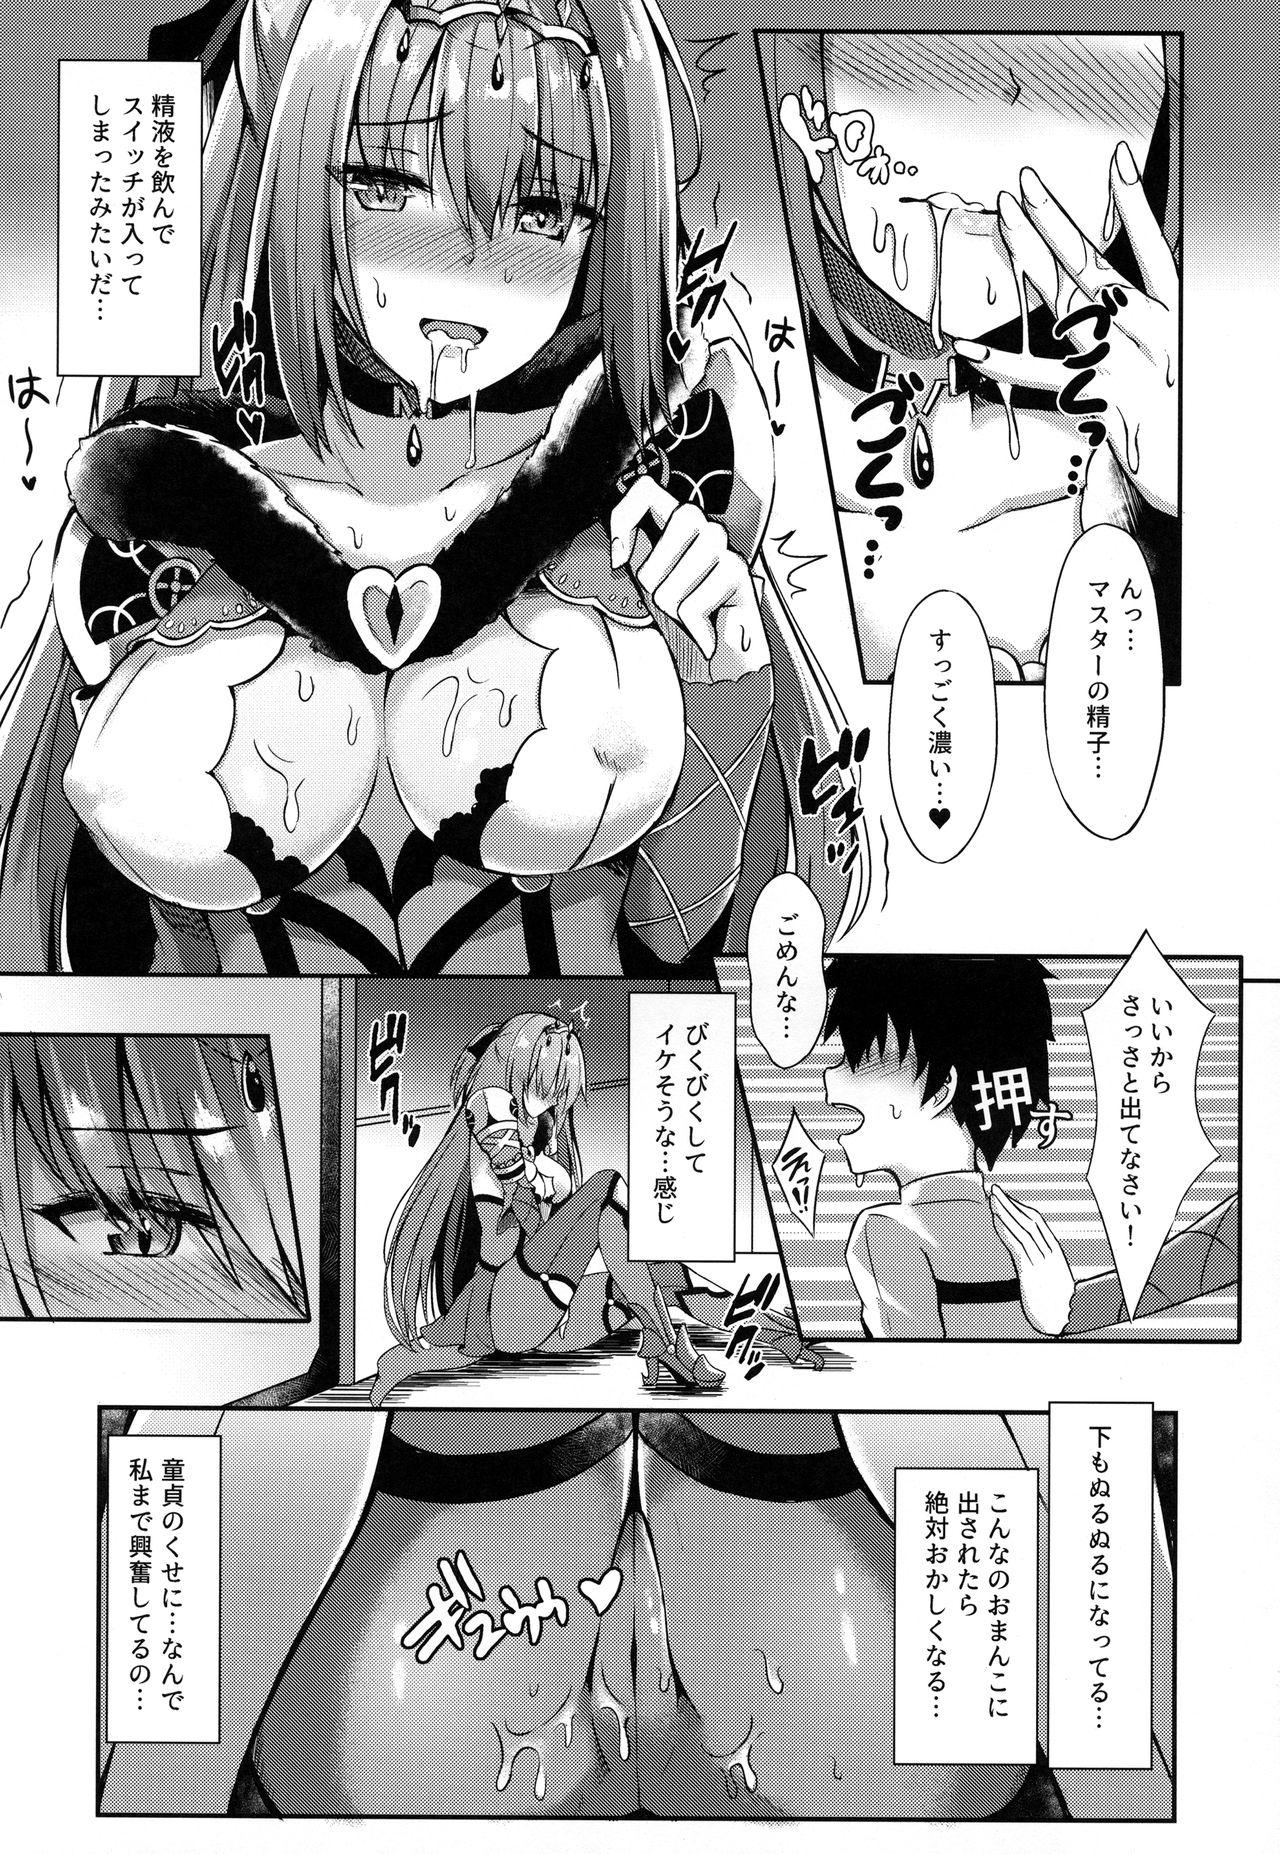 Nasty Porn Scathach Nee-chan ga Kanri Shite Ageyou - Fate grand order From - Page 11